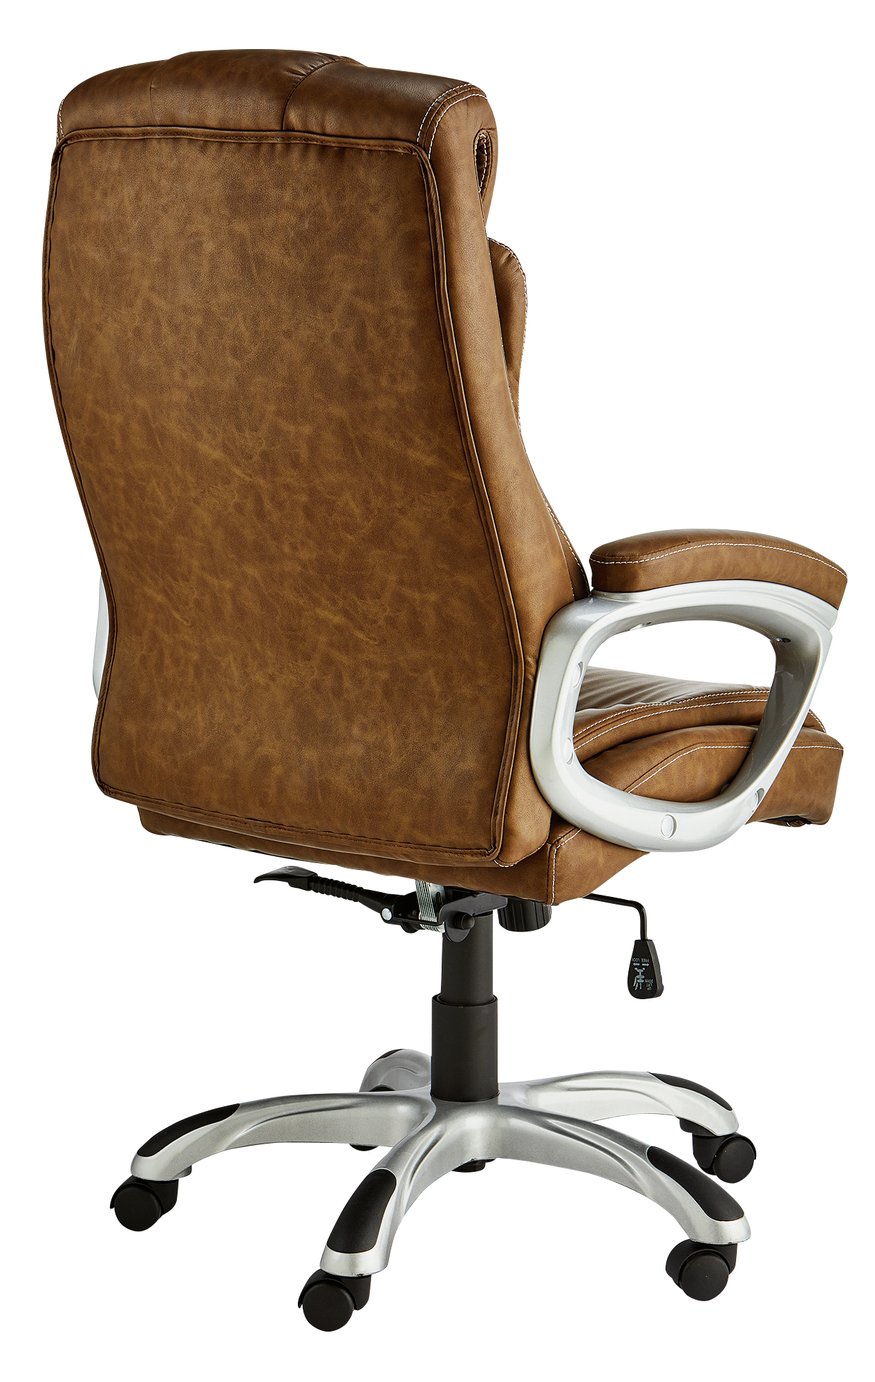 X-Rocker Leather Effect Executive Chair - Brown at Argos Reviews